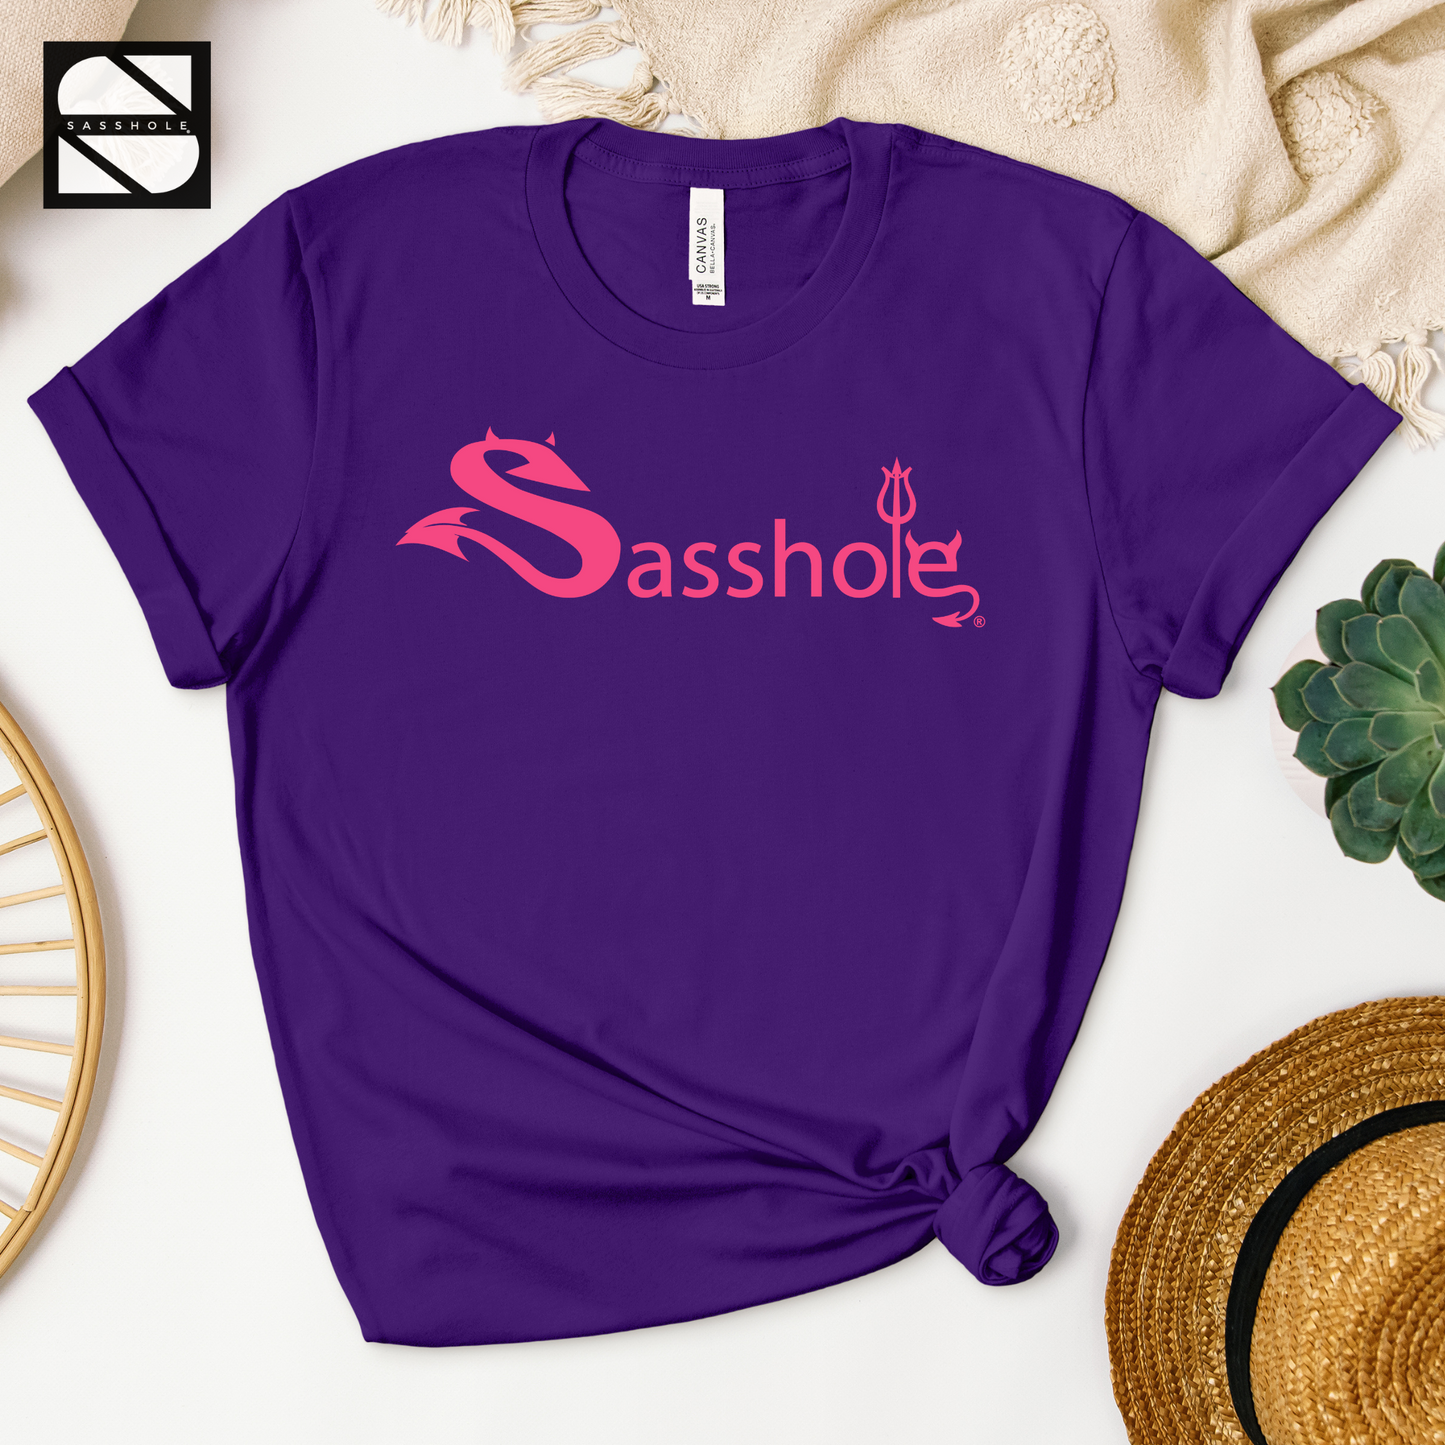 The Devil's Dress Code: Unleash Your Sass and Attitude Women's Tshirt